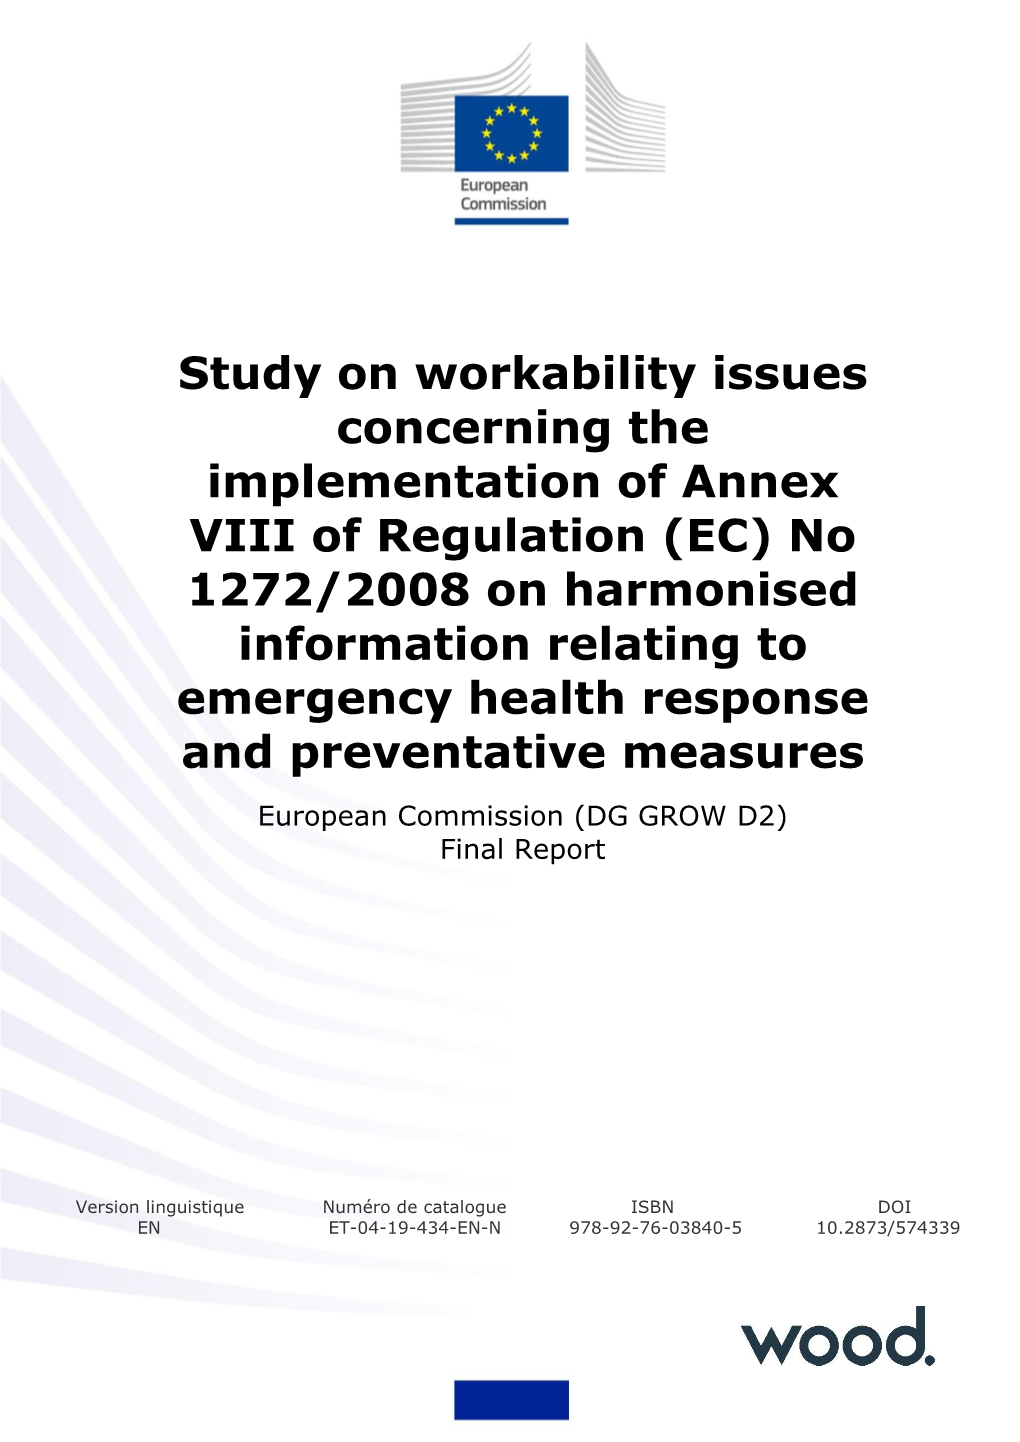 Study on Workability Issues Concerning the Implementation of Annex VIII of Regulation (EC) No 1272/2008 on Harmonised Informatio